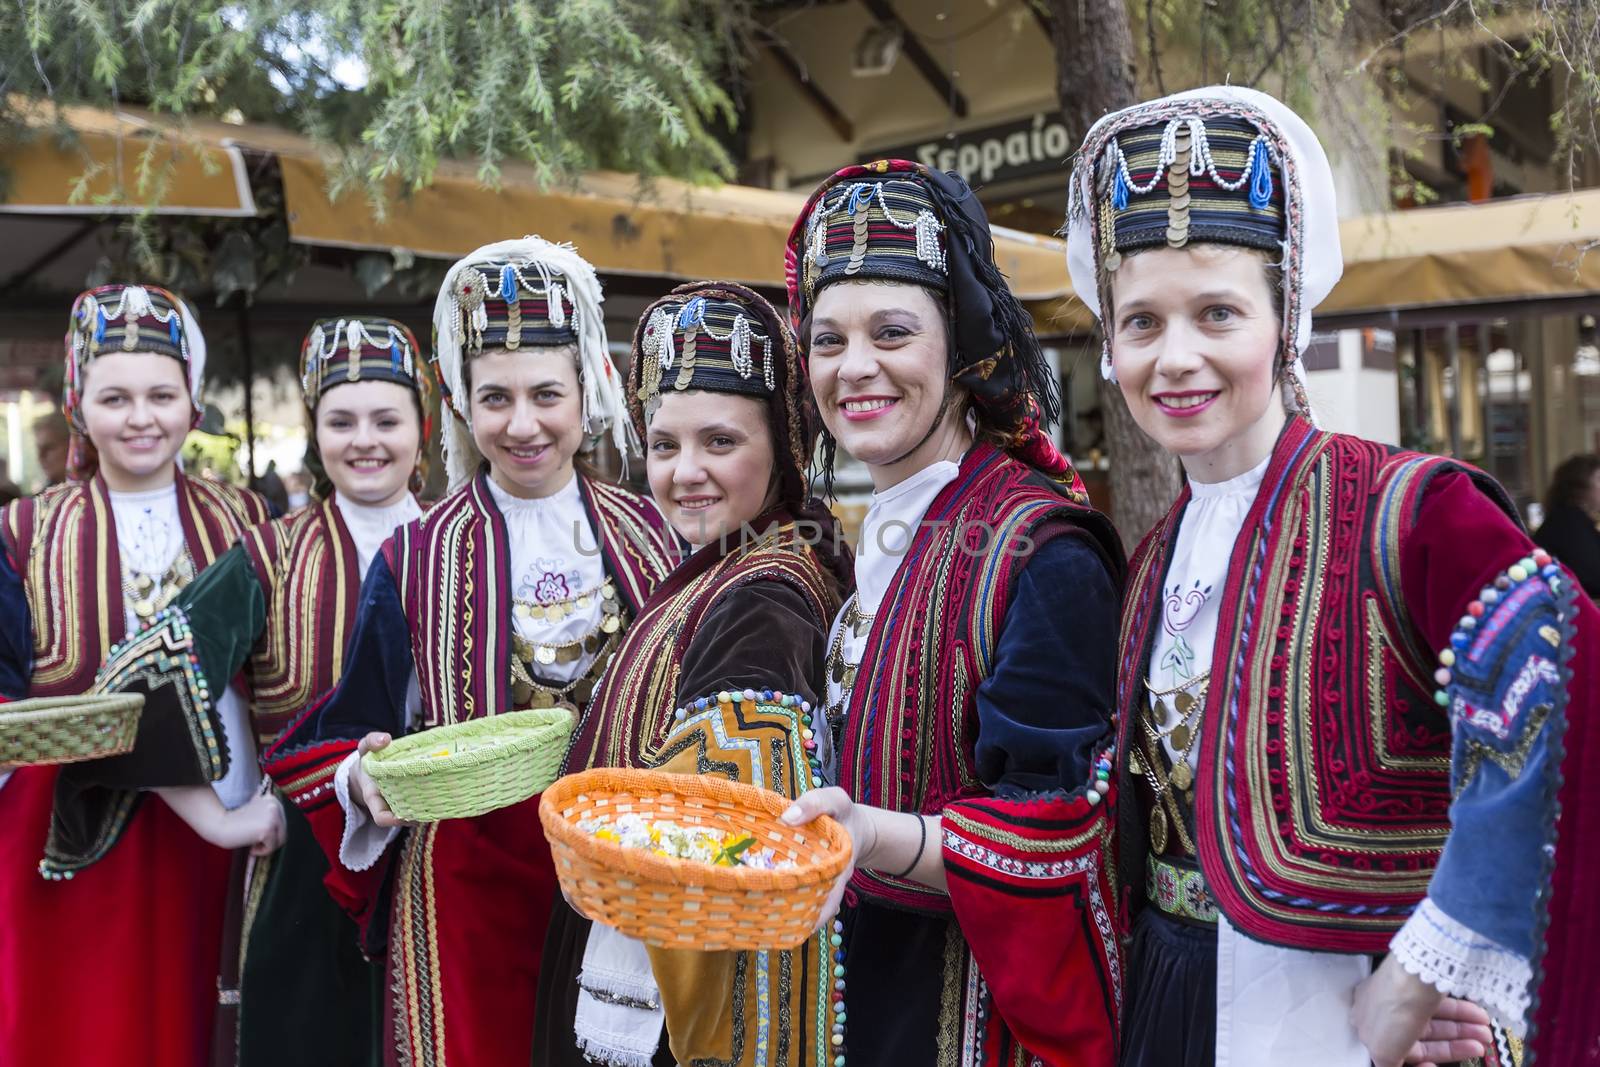 Thessaloniki, Greece- April 17, 2015: Folk dancers from the Crete club at the parade in Thessaloniki, Greece.